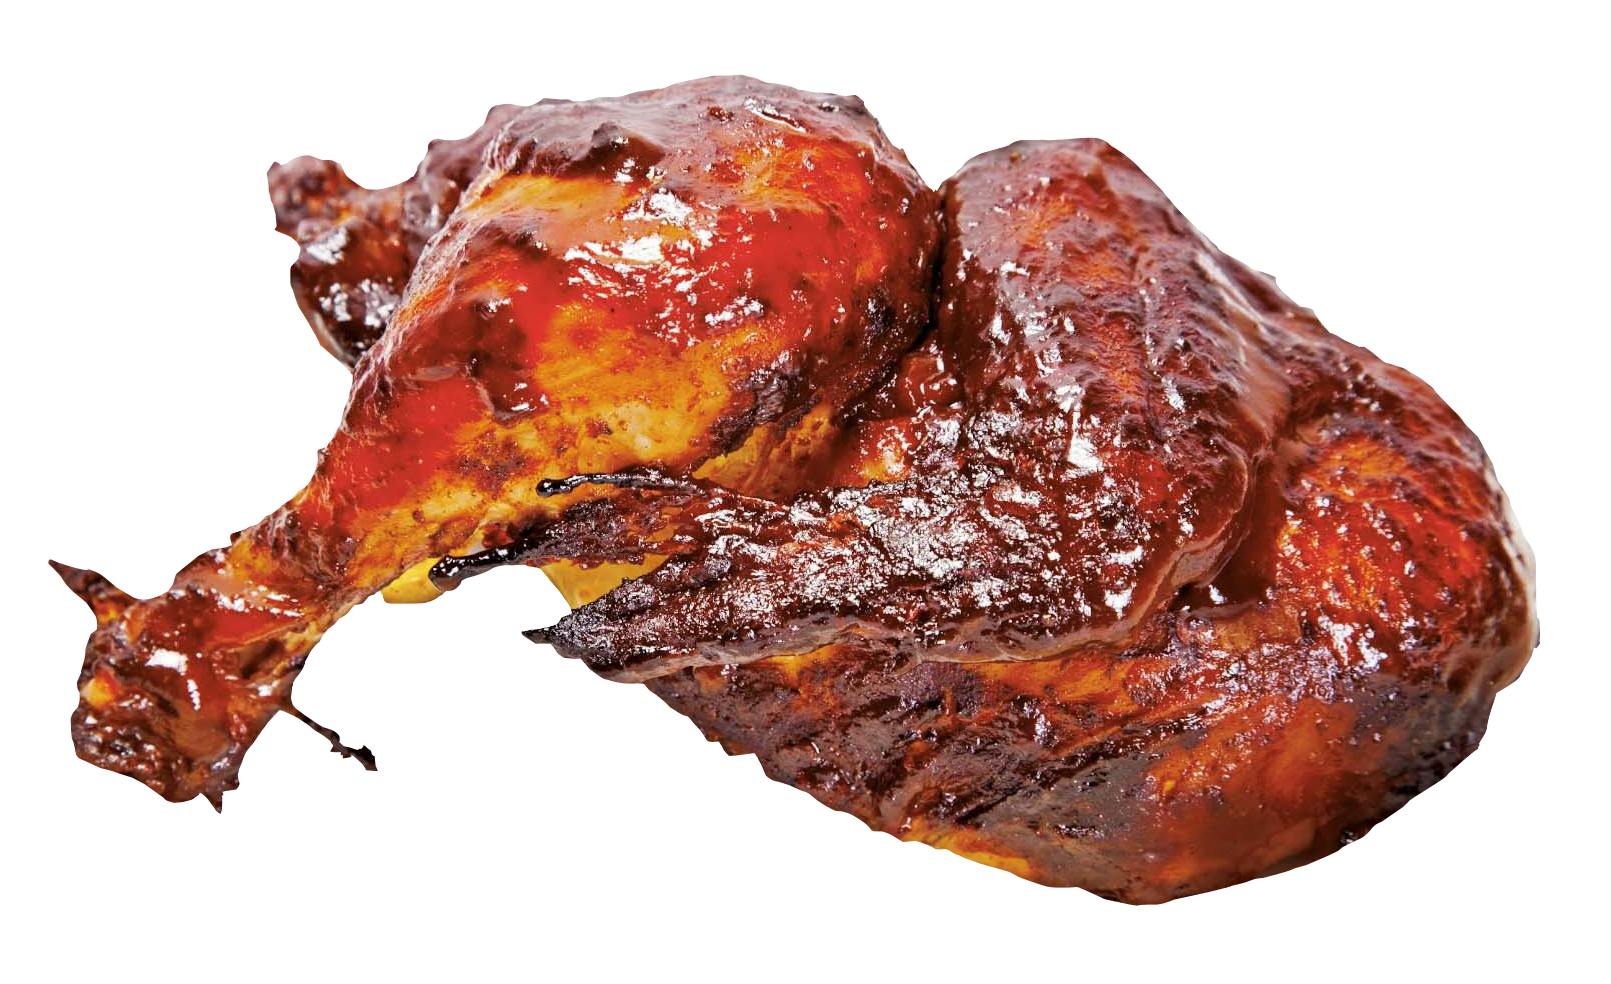 barbecue grill chicken png transparent image pngpix #36315